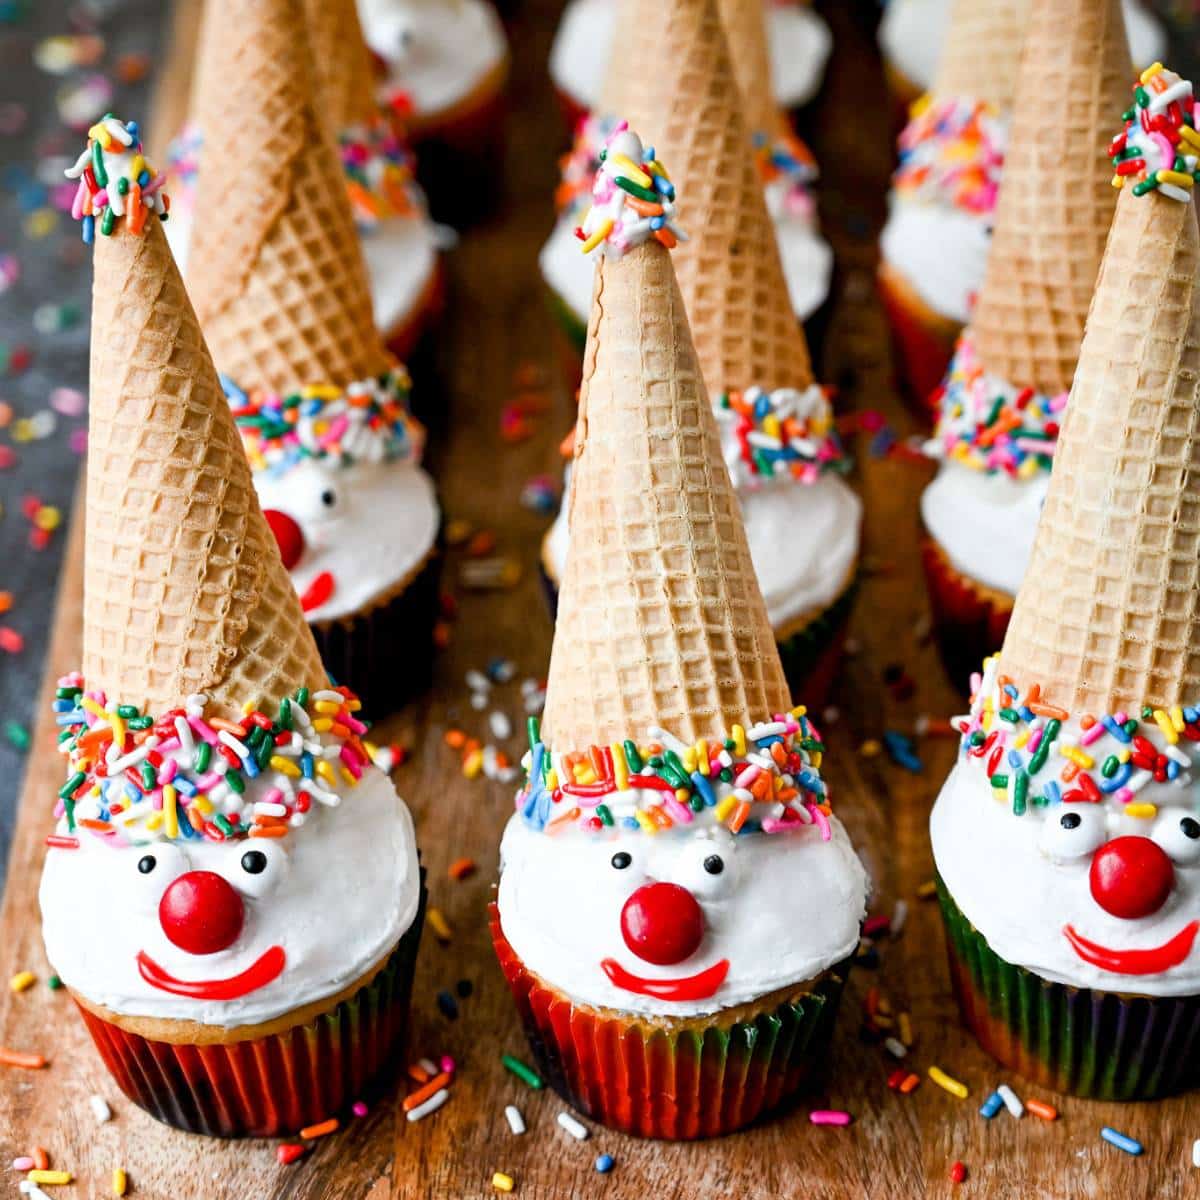 clown cupcakes with sugar ice cream cone hats on a wood platter with sprinkles